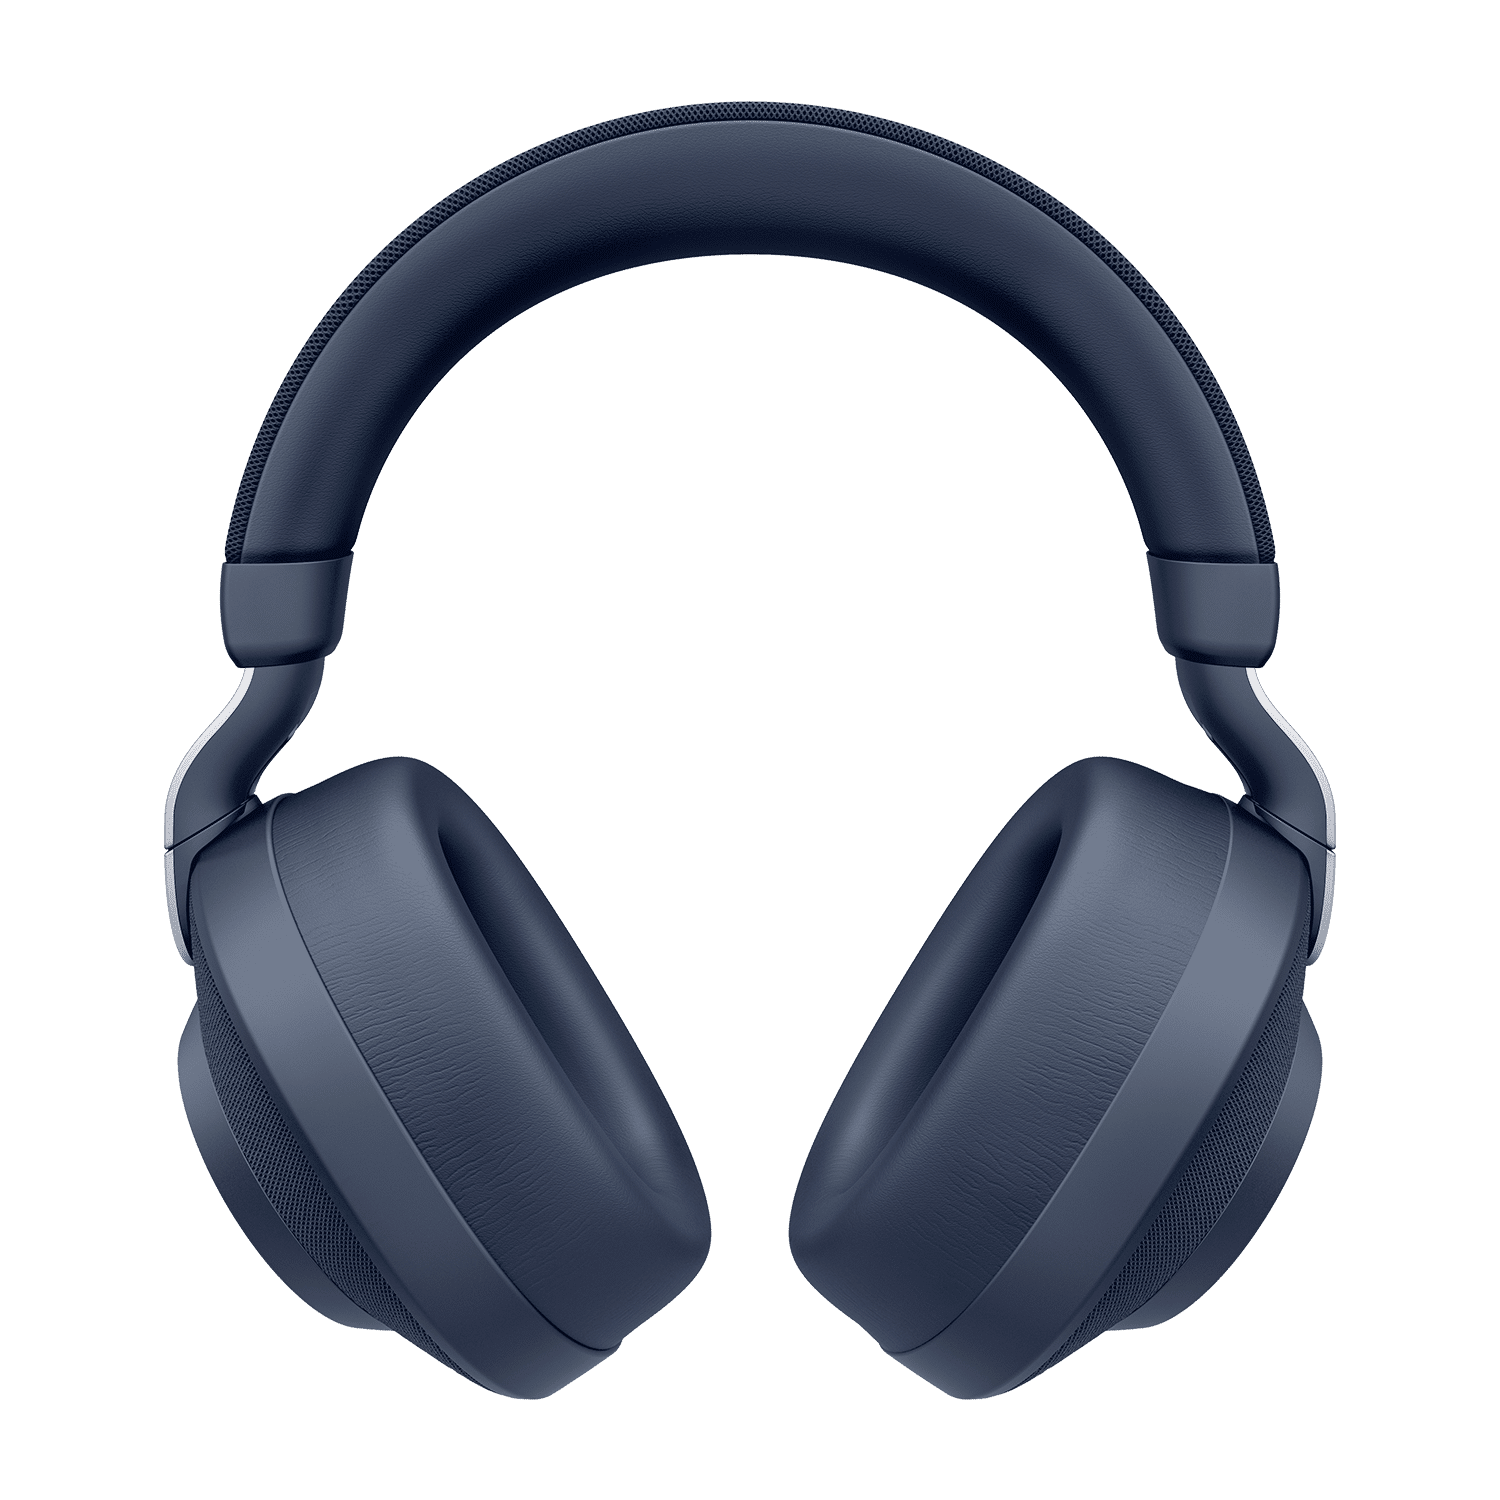 Jabra Elite 85H Active Noise Cancelling Wireless Headphones Launched in